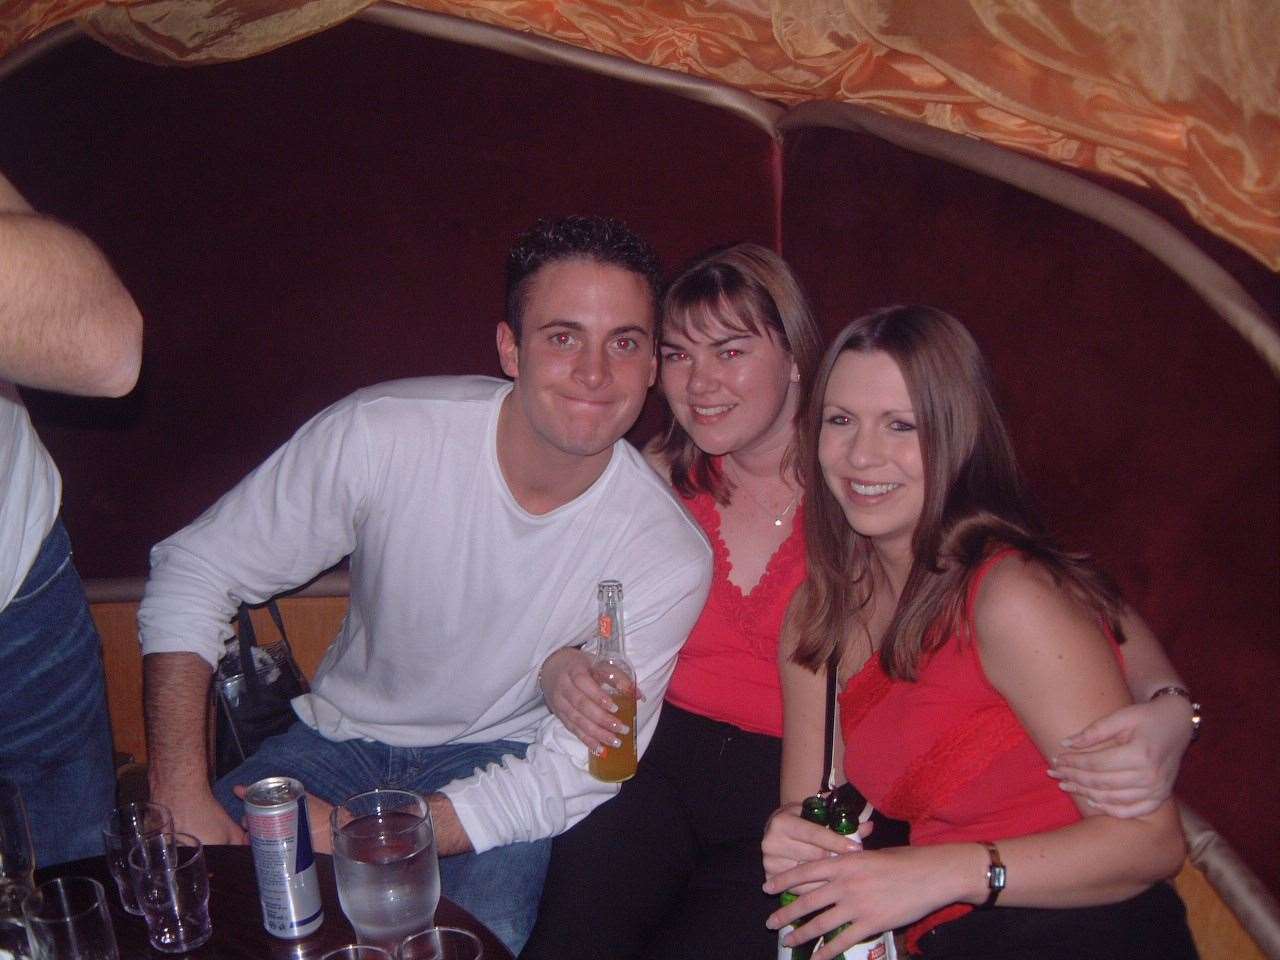 Gary Lucy, otherwise known as Luke Morgan in Hollyoaks, with fans at Ikon in 2002. Picture: Karl Hernandez